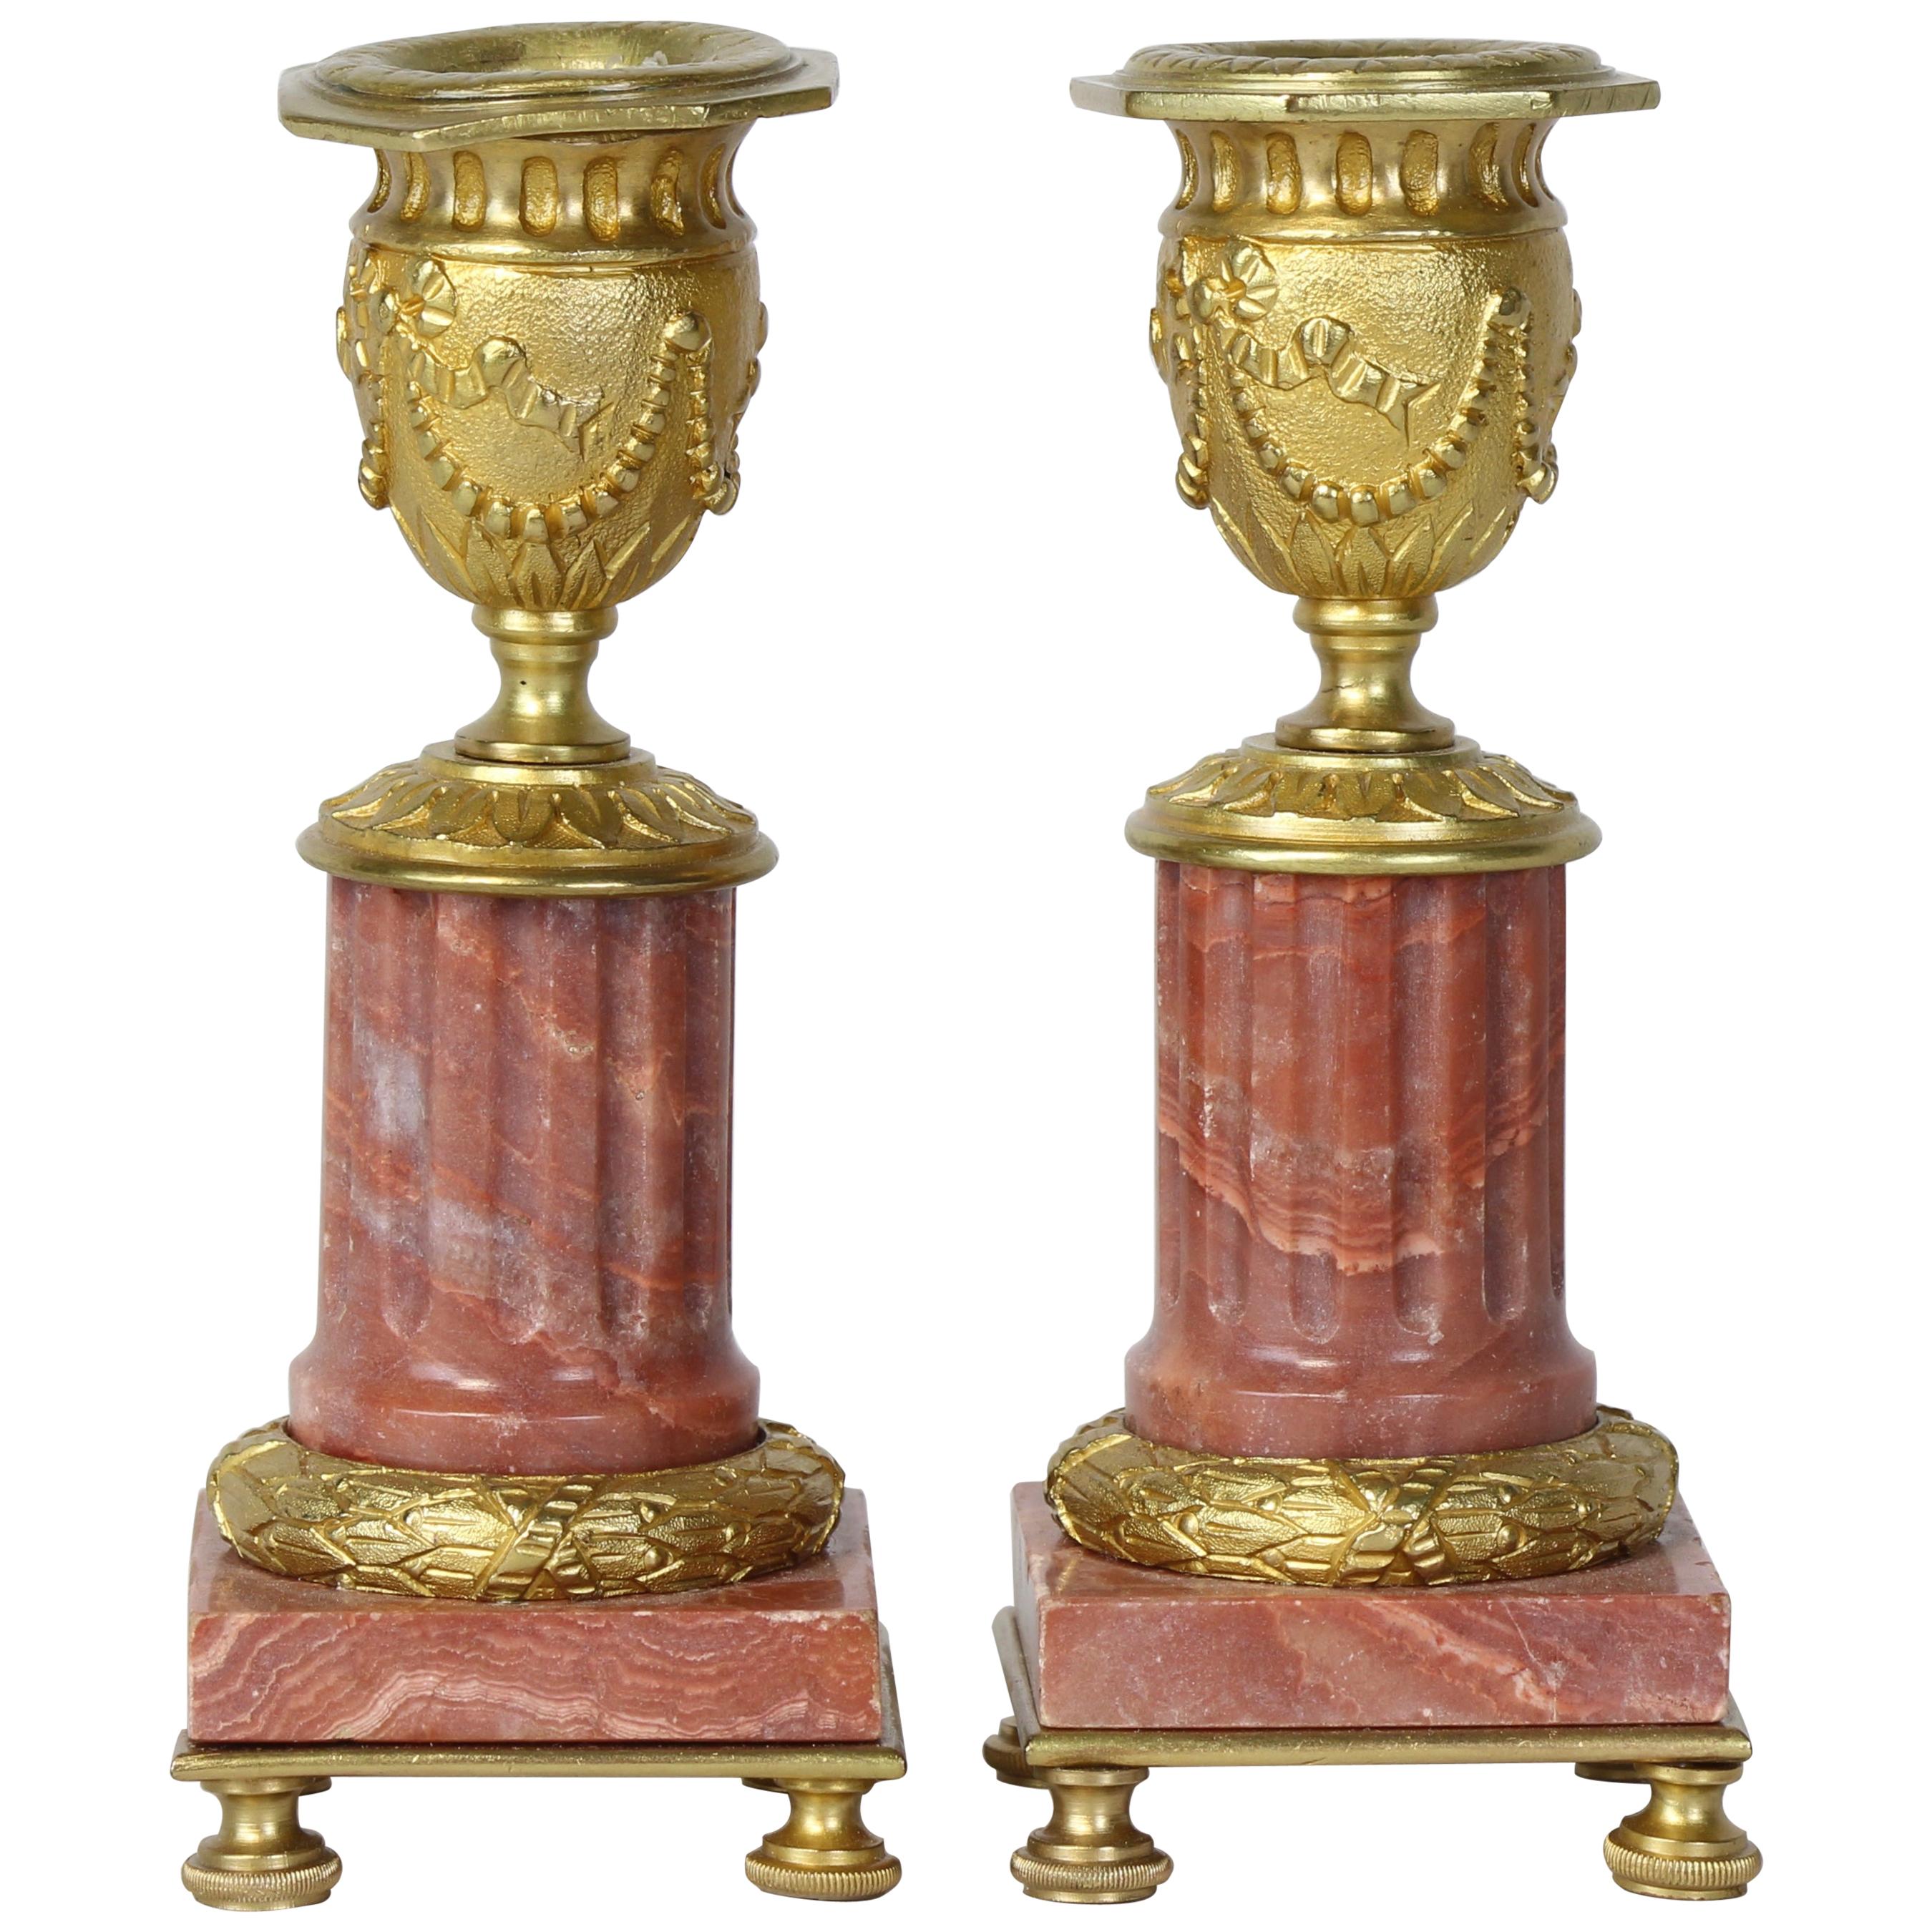 Pair of French Rose Marble Neoclassical Style Candlesticks